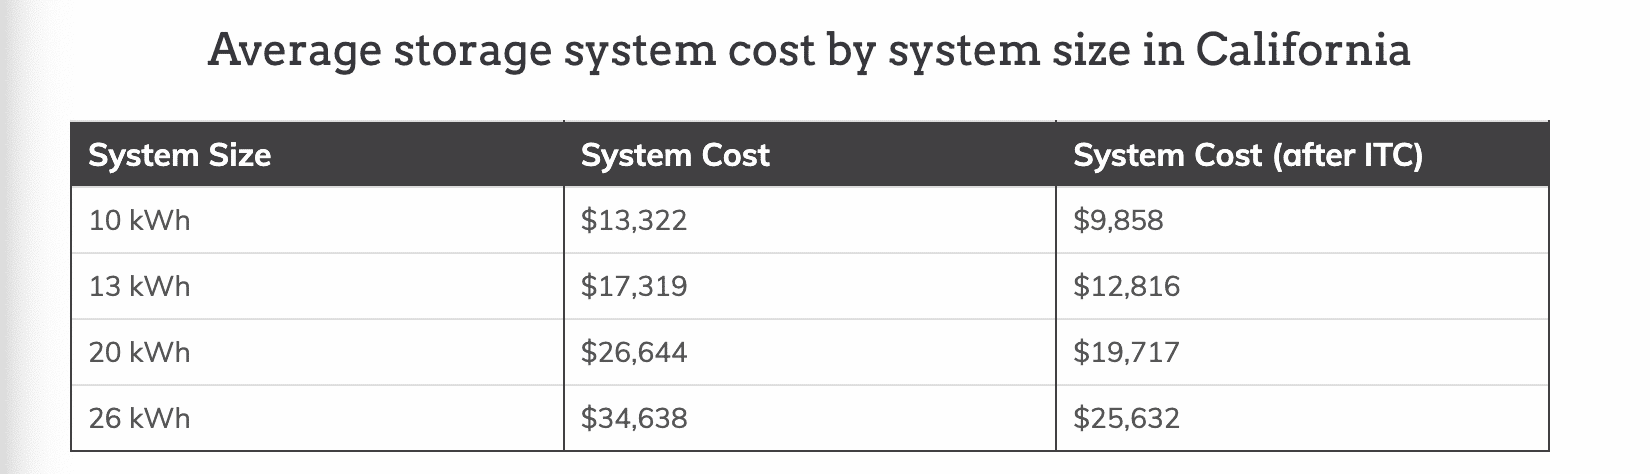 Average storage system cost by system size in California